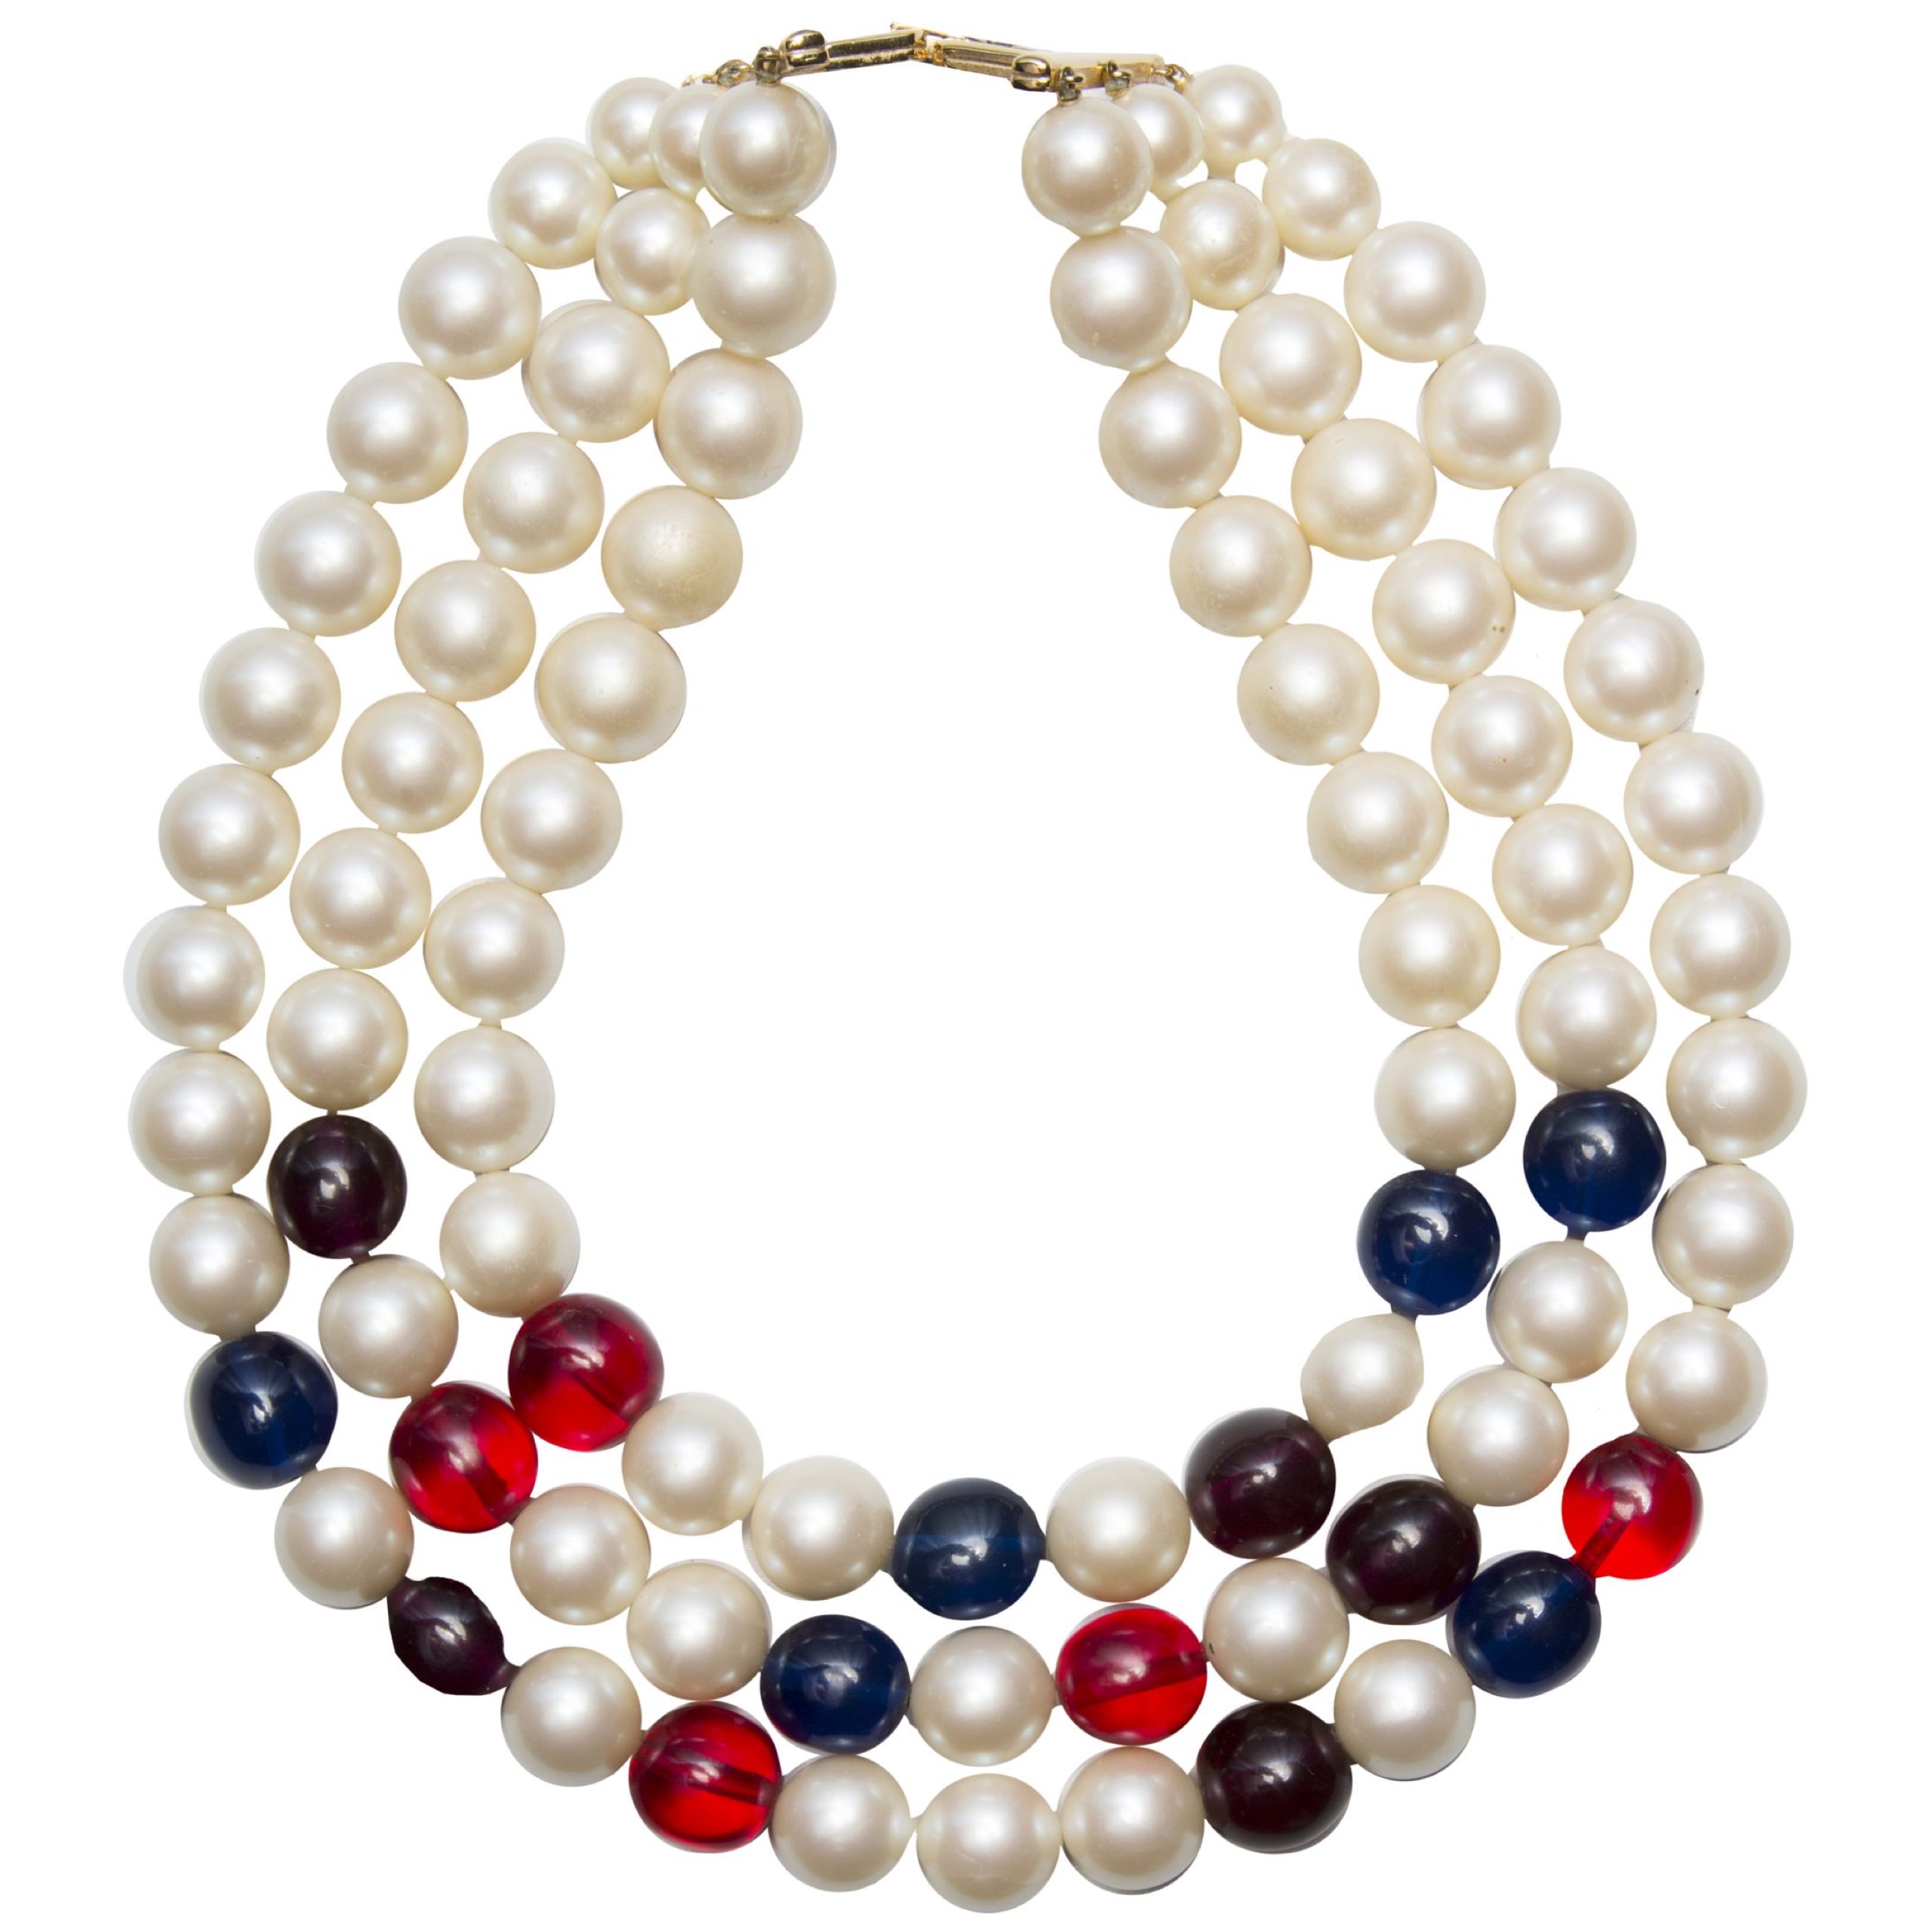 Vintage statement pearl necklace with colours